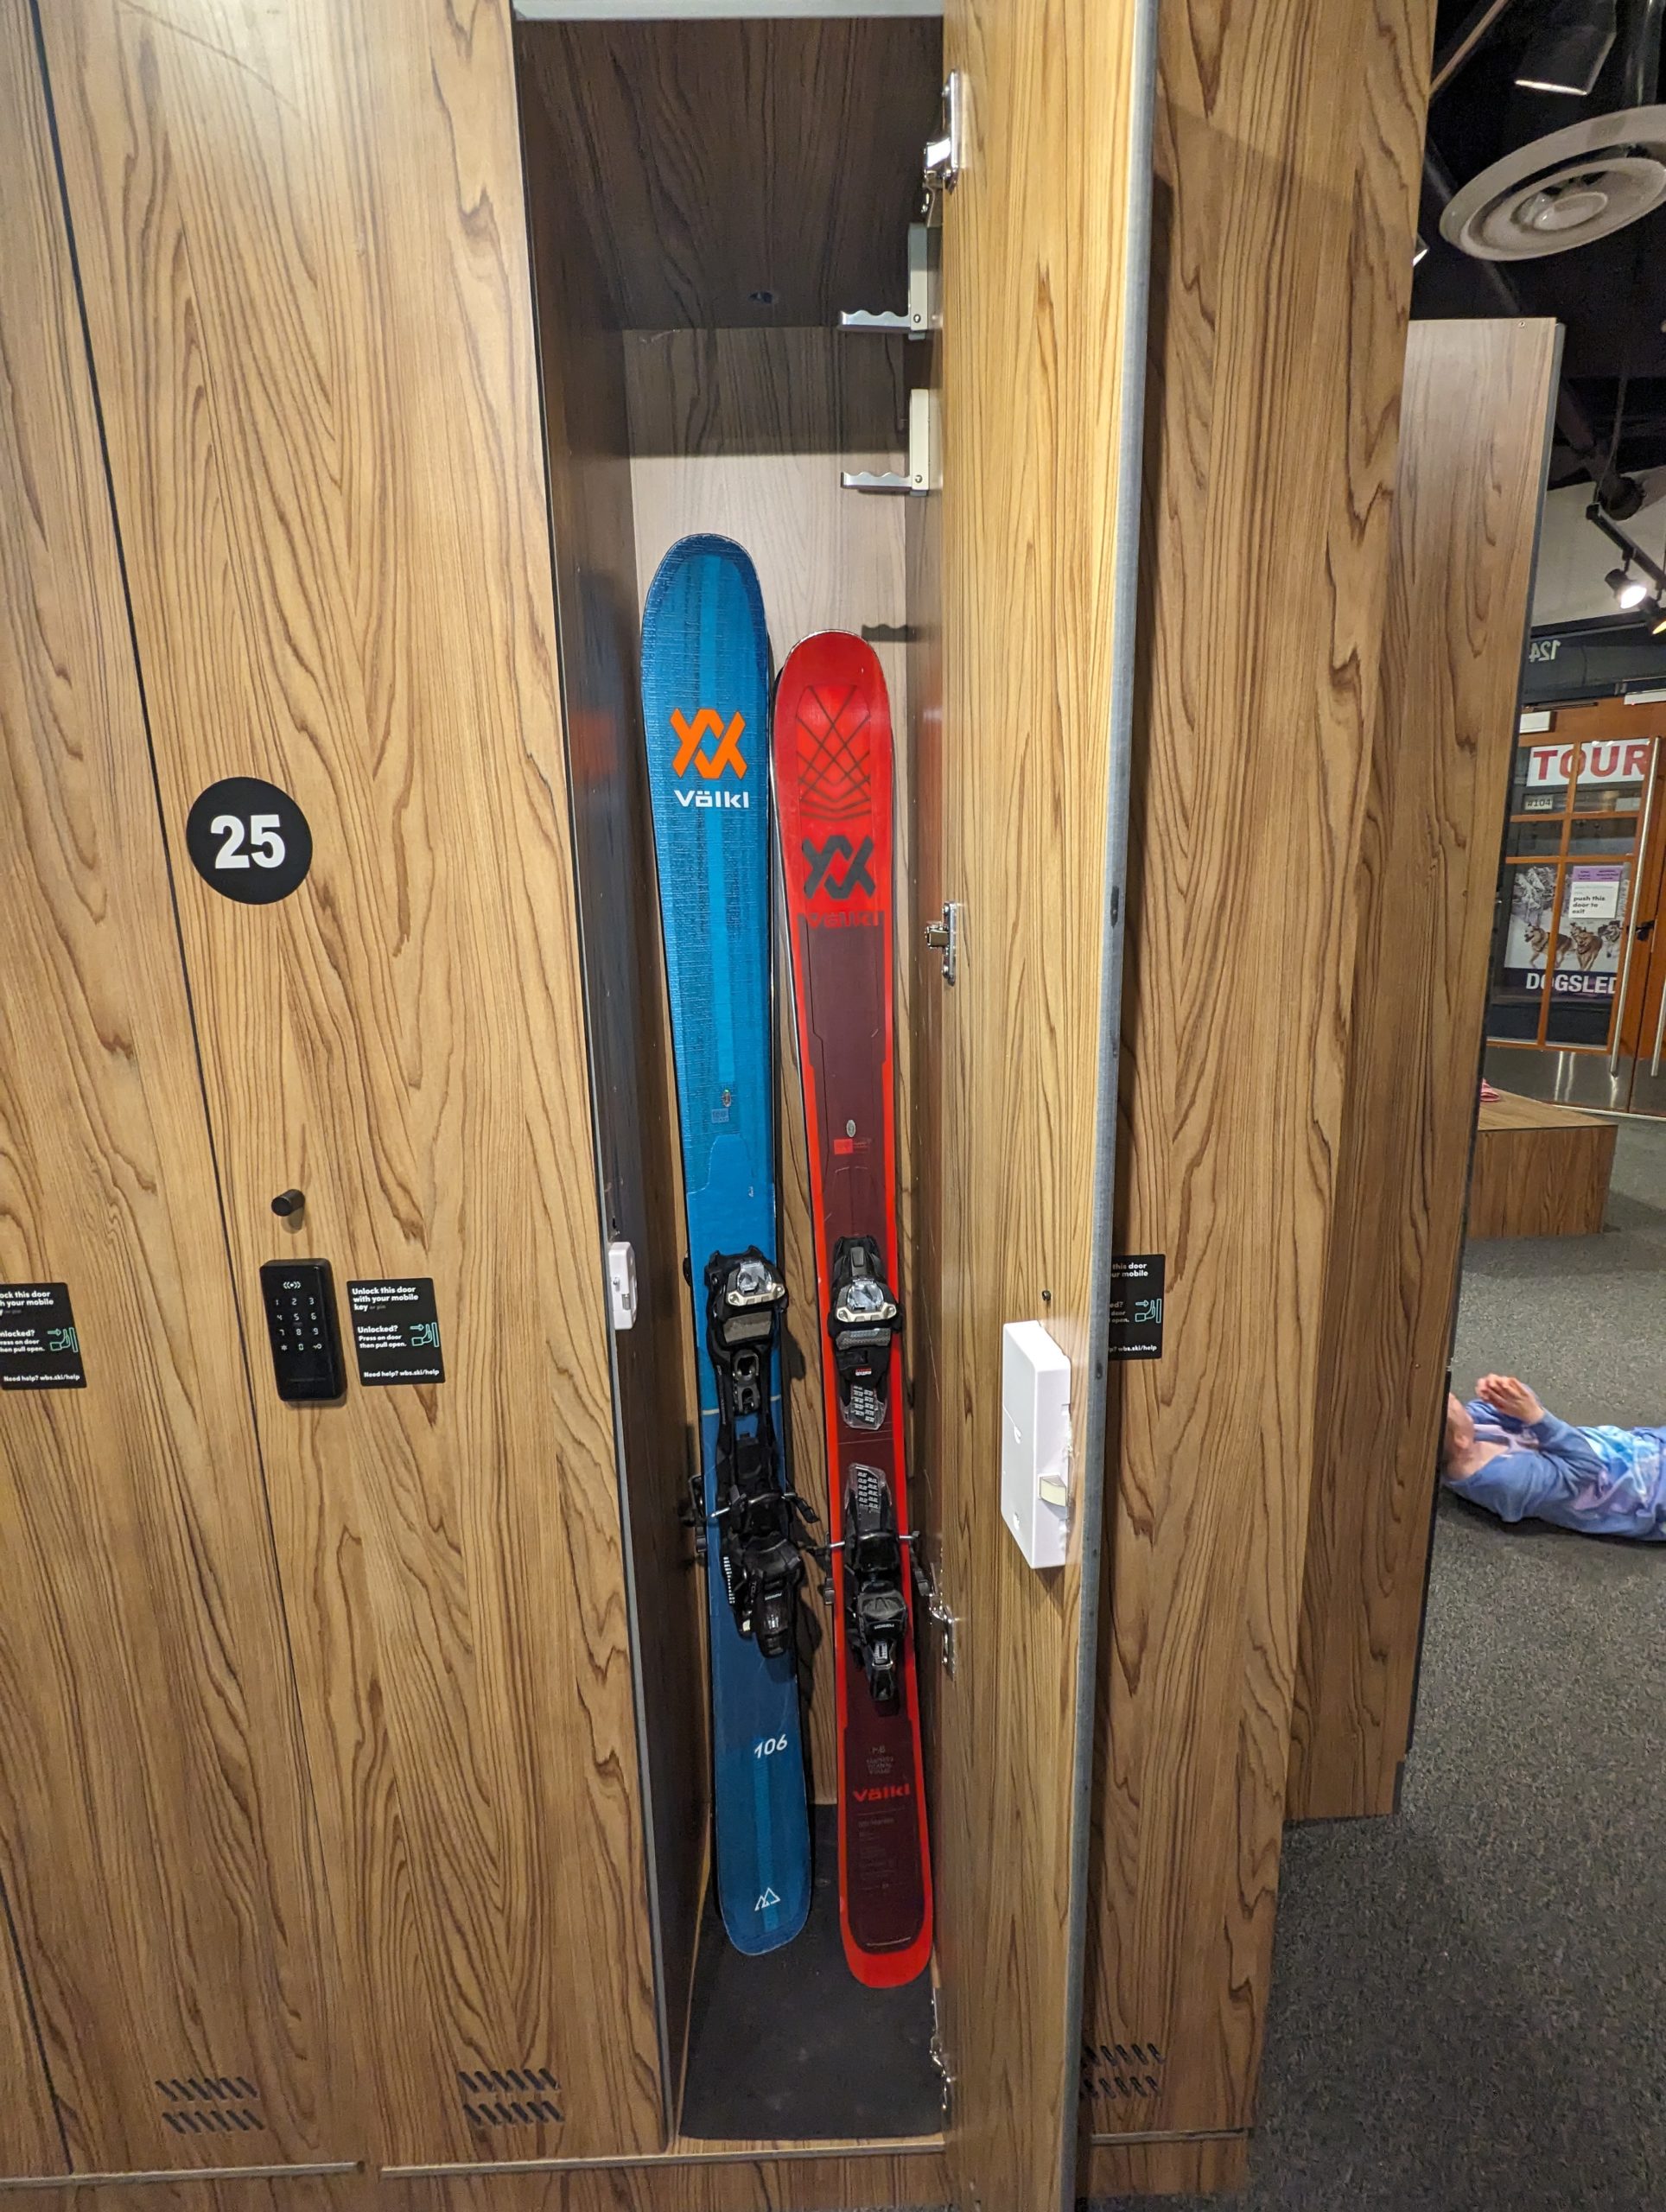 About Us: Our locker holds a pair of skis, ready for your next snowy adventure.